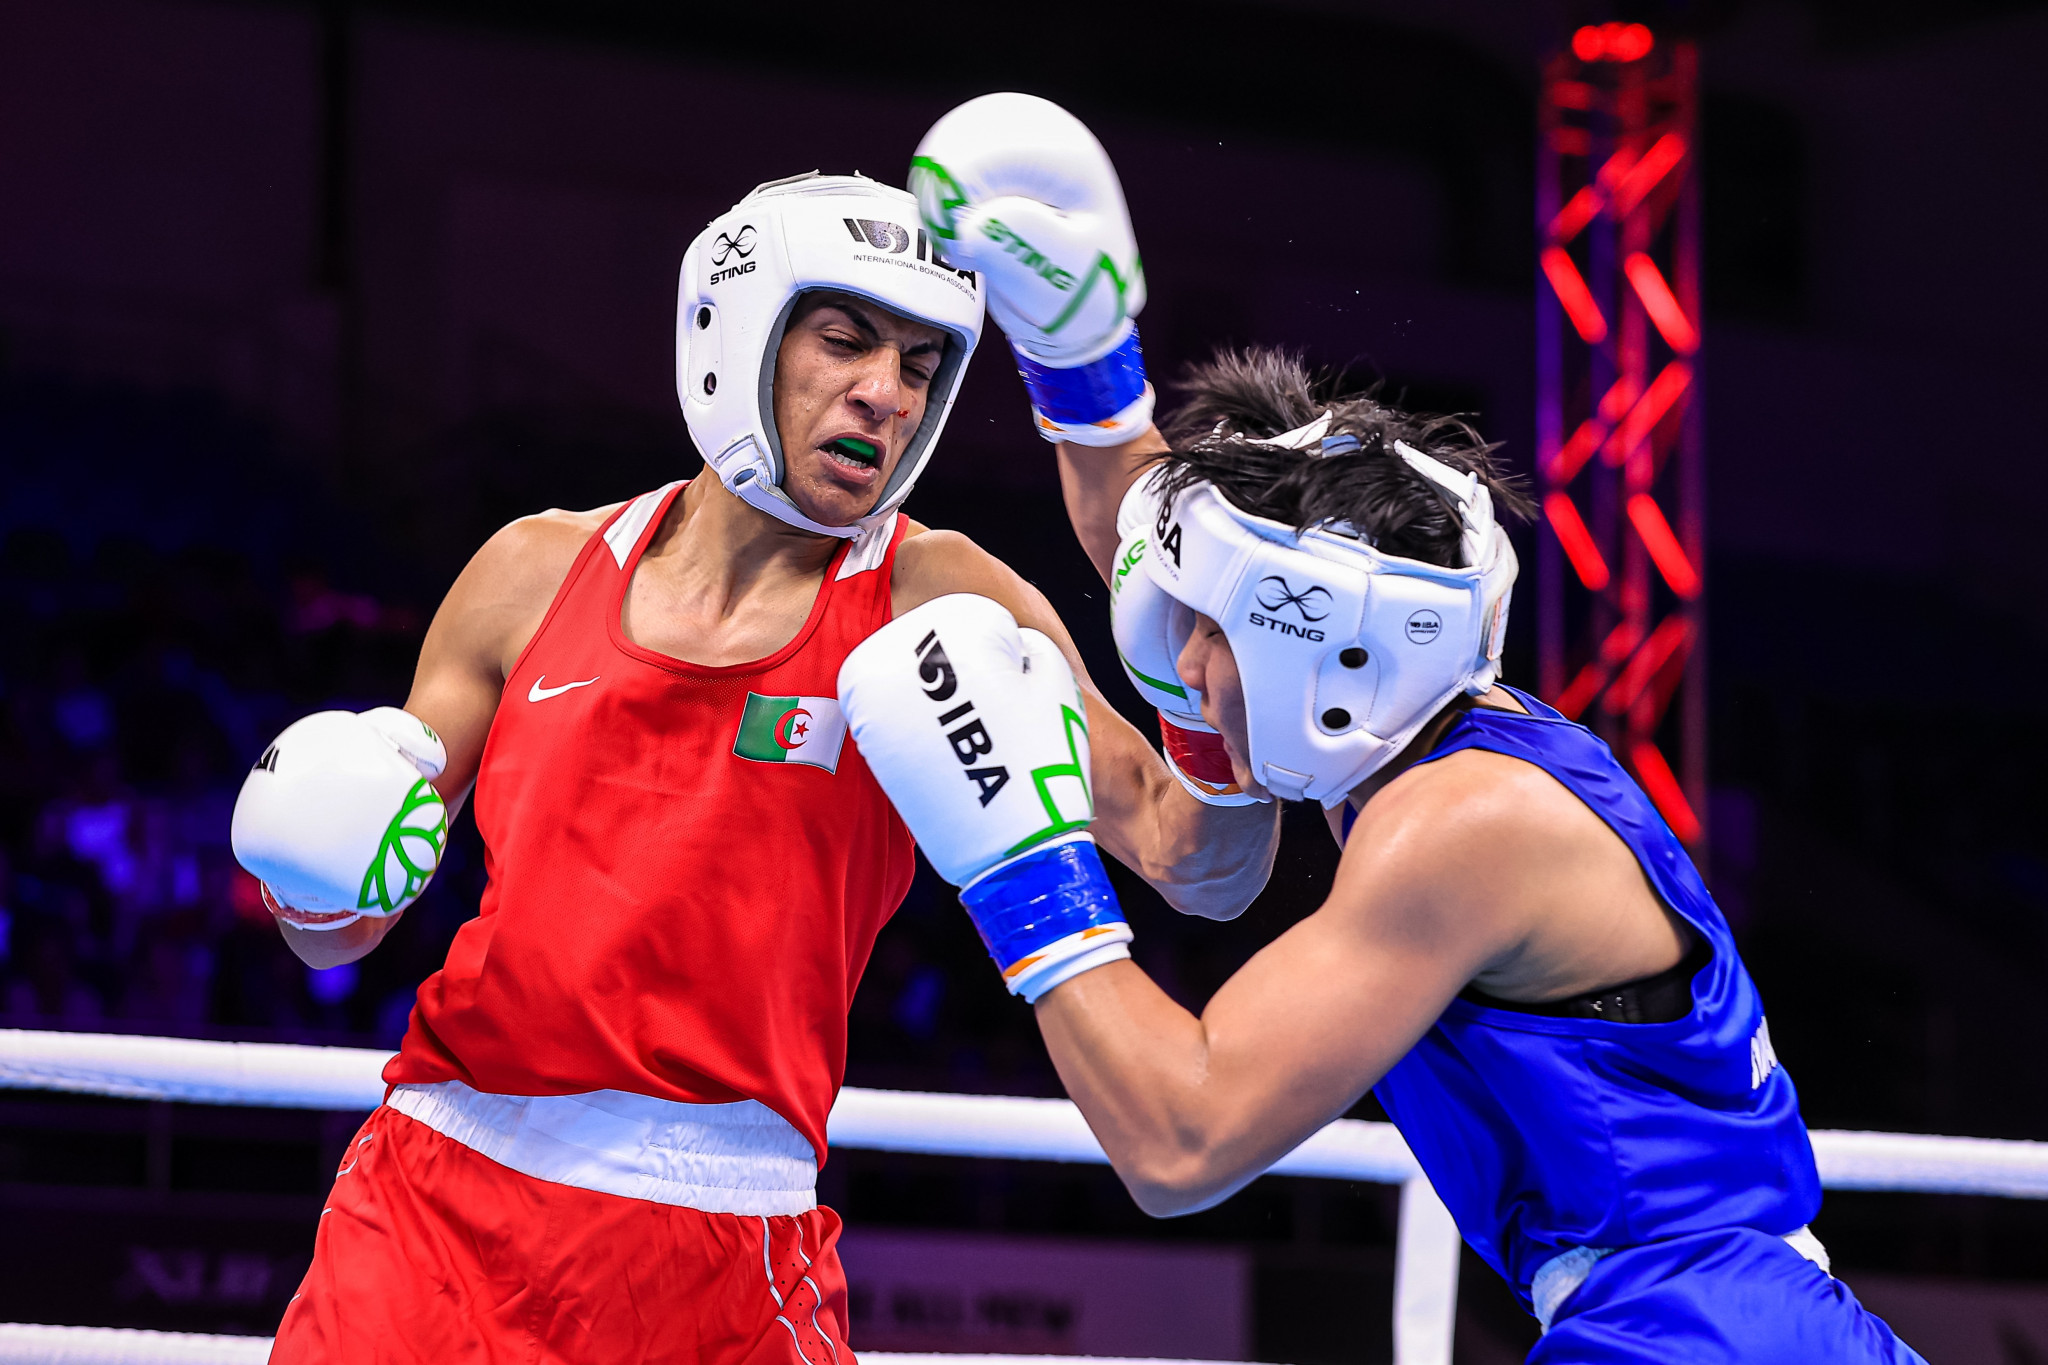 Algeria's Imane Khelif, left, has been denied the chance to compete in today's welterweight final at the IBA Women's World Championships in New Delhi after failing an eligibility test ©IBA